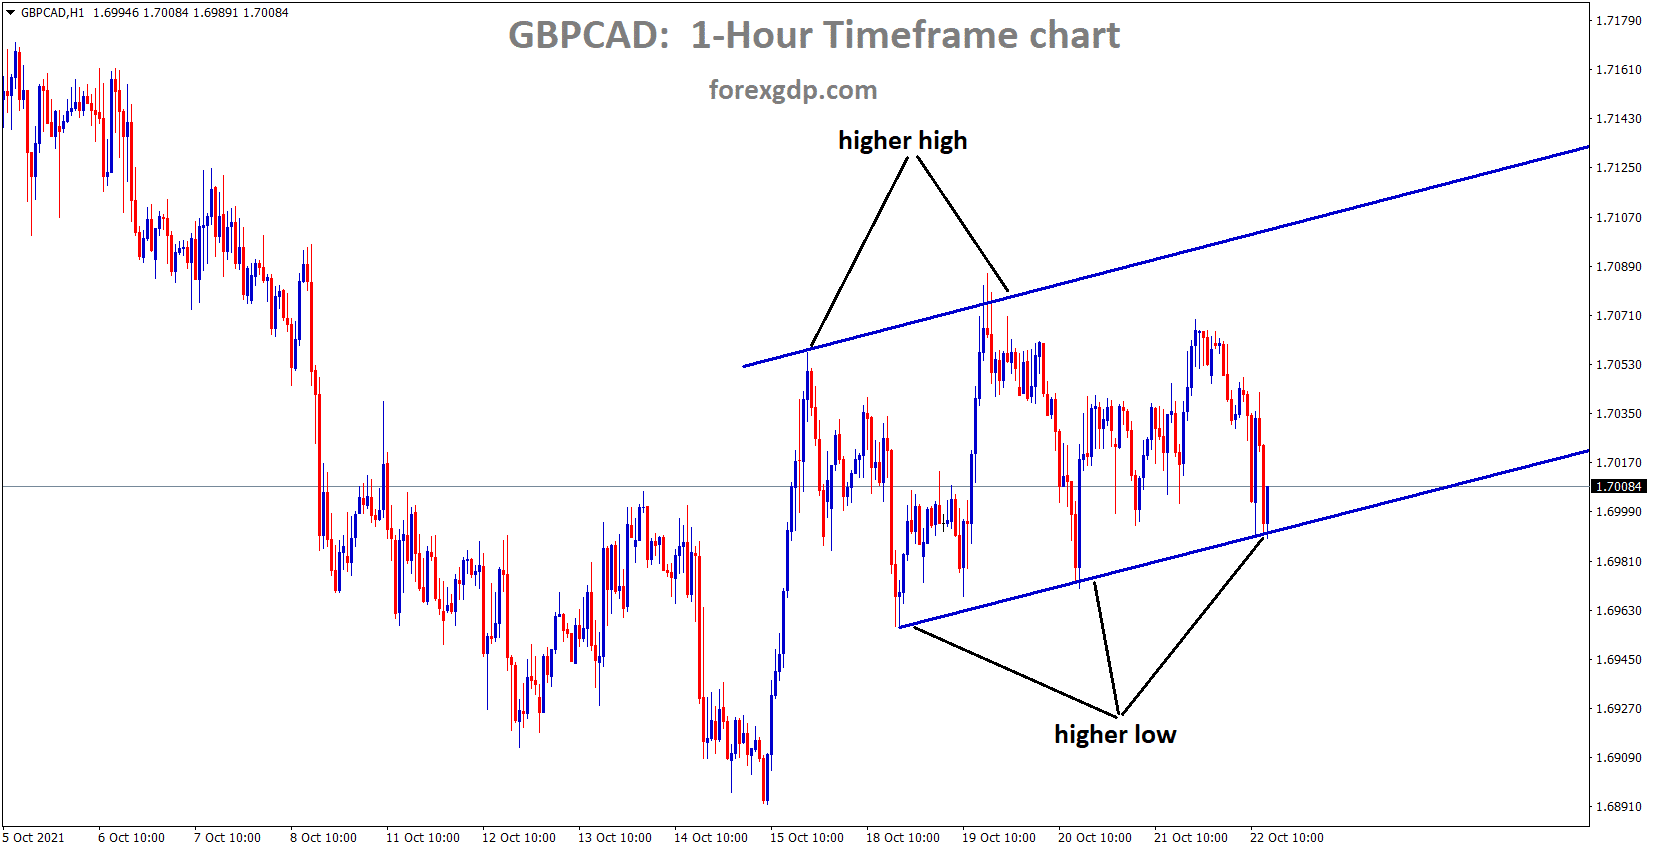 GBPCAD is moving between the specific price ranges